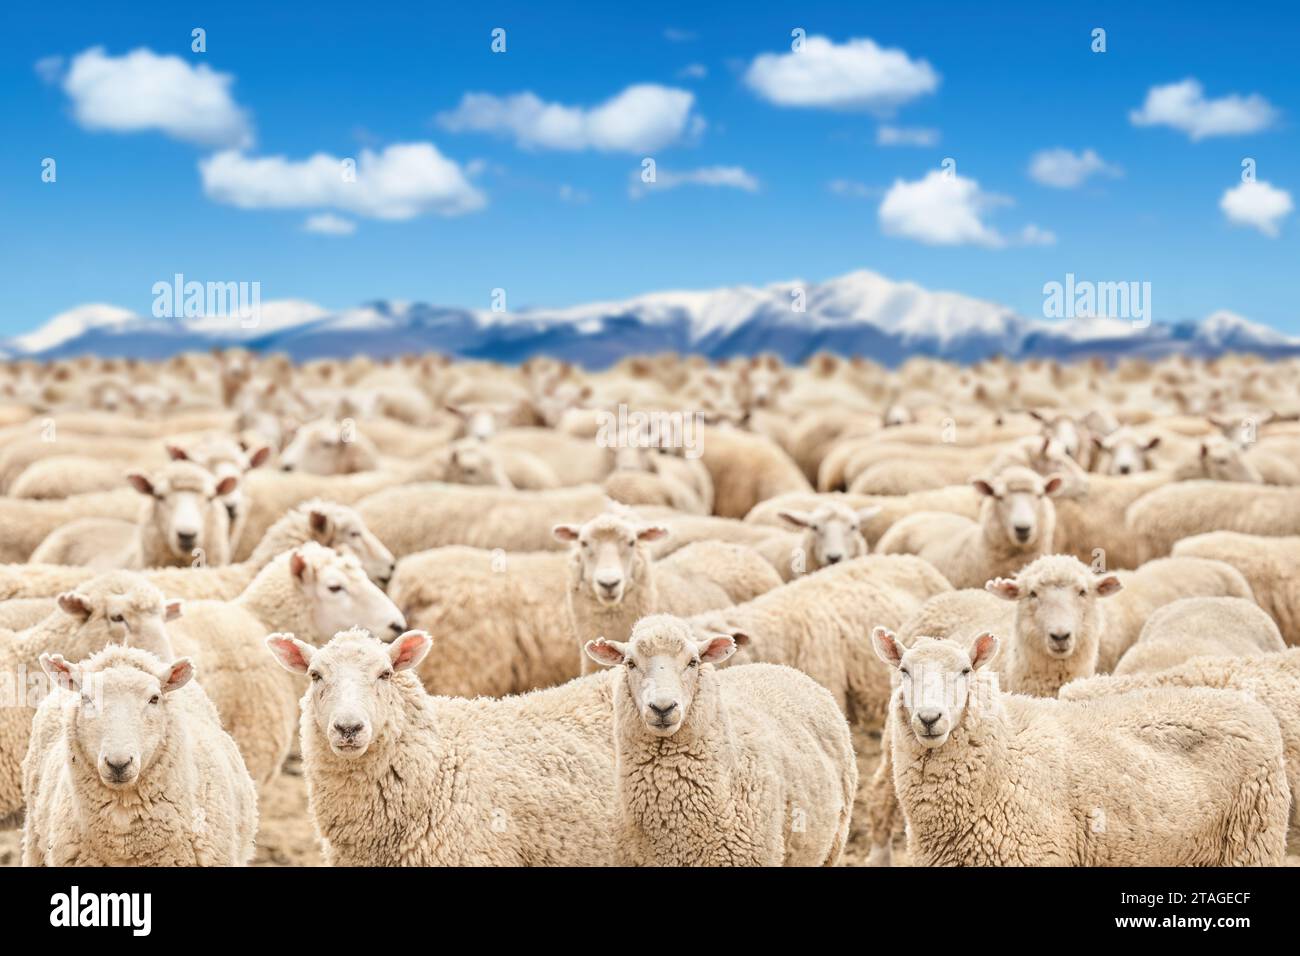 Livestock farm, flock of sheep against snowy mountains and blue sky, shallow depth of field Stock Photo